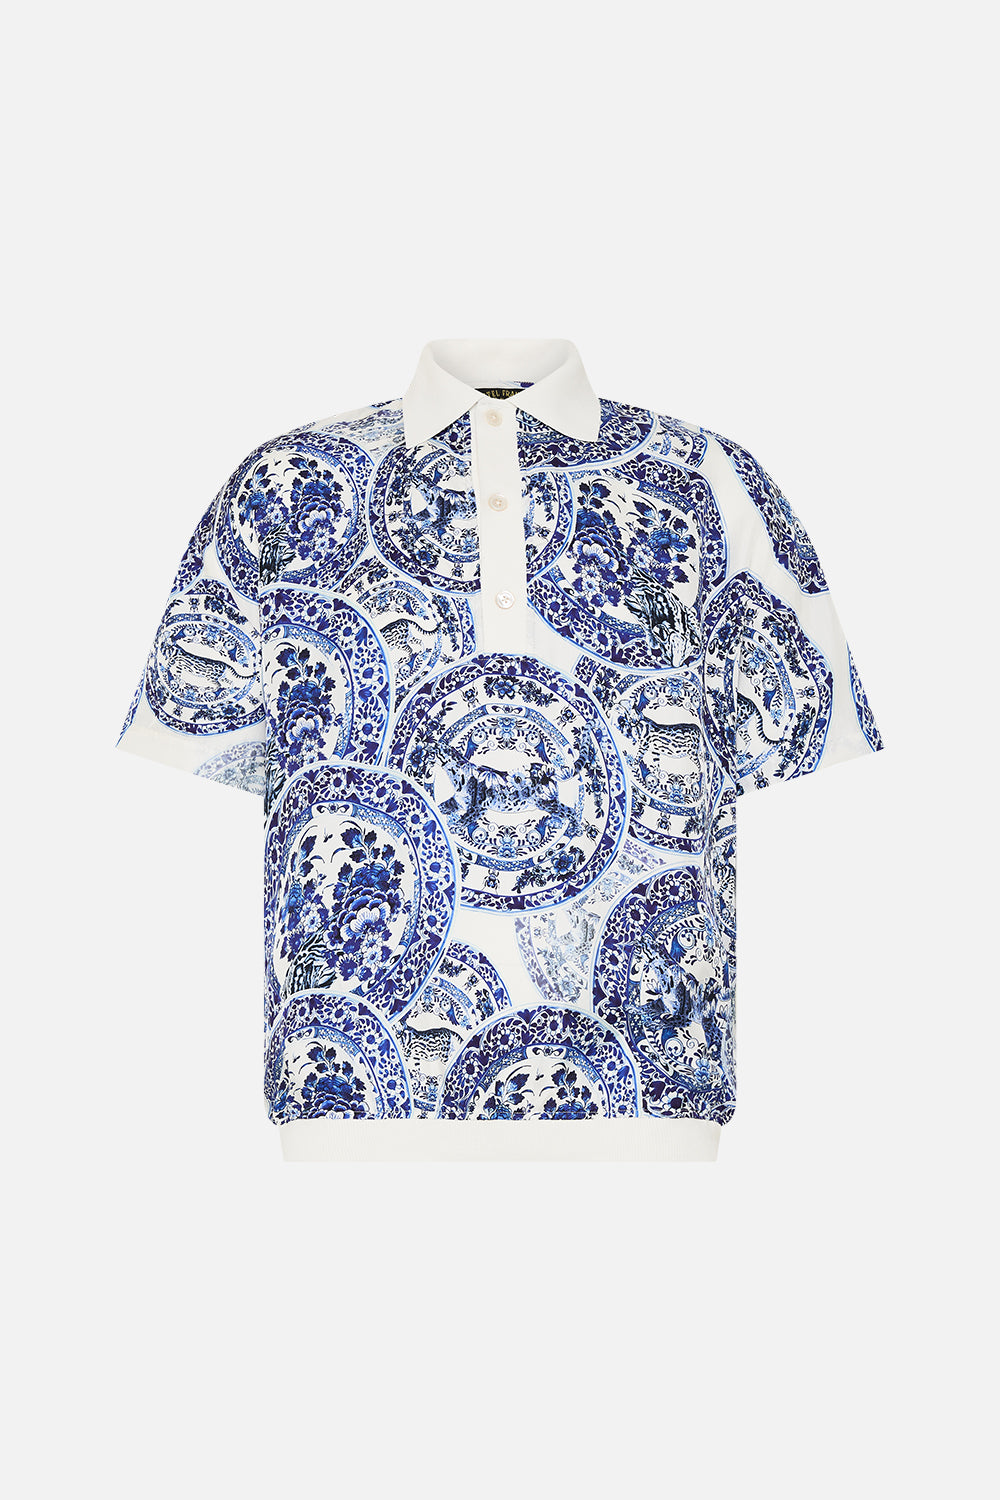 Front product view of Hotel Franks By CAMILLA mens polo shirt in Glaze and Graze print